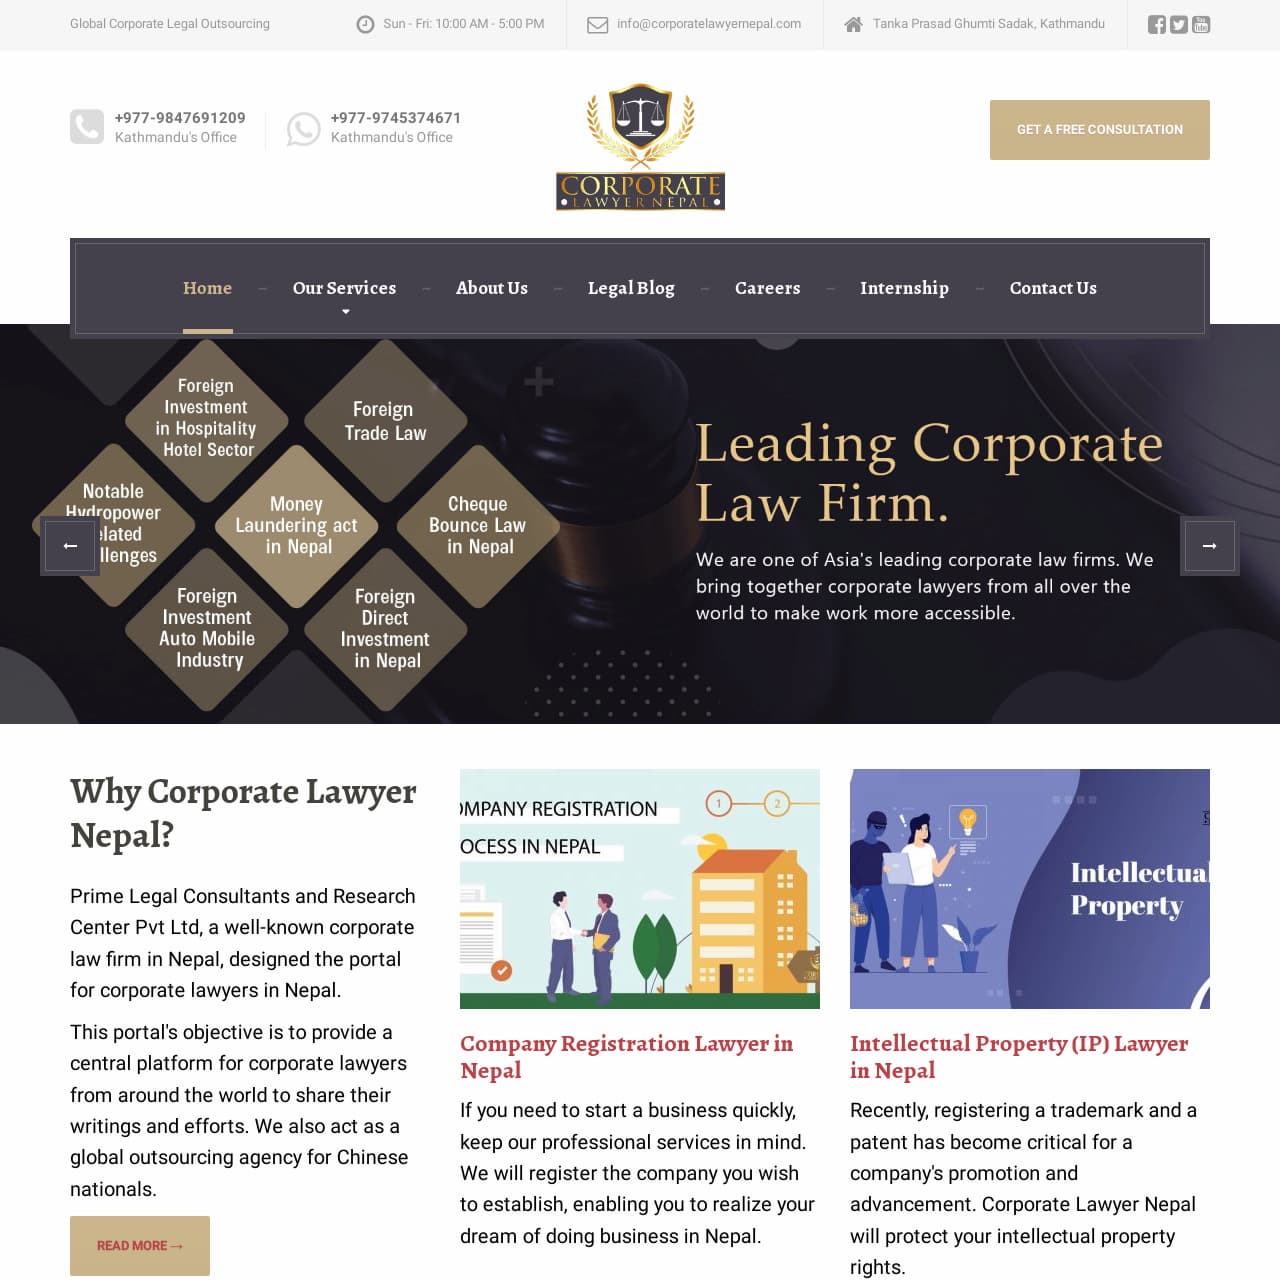 Corporate Lawyer Nepal - Global Corporate Legal Outsourcing Web Design